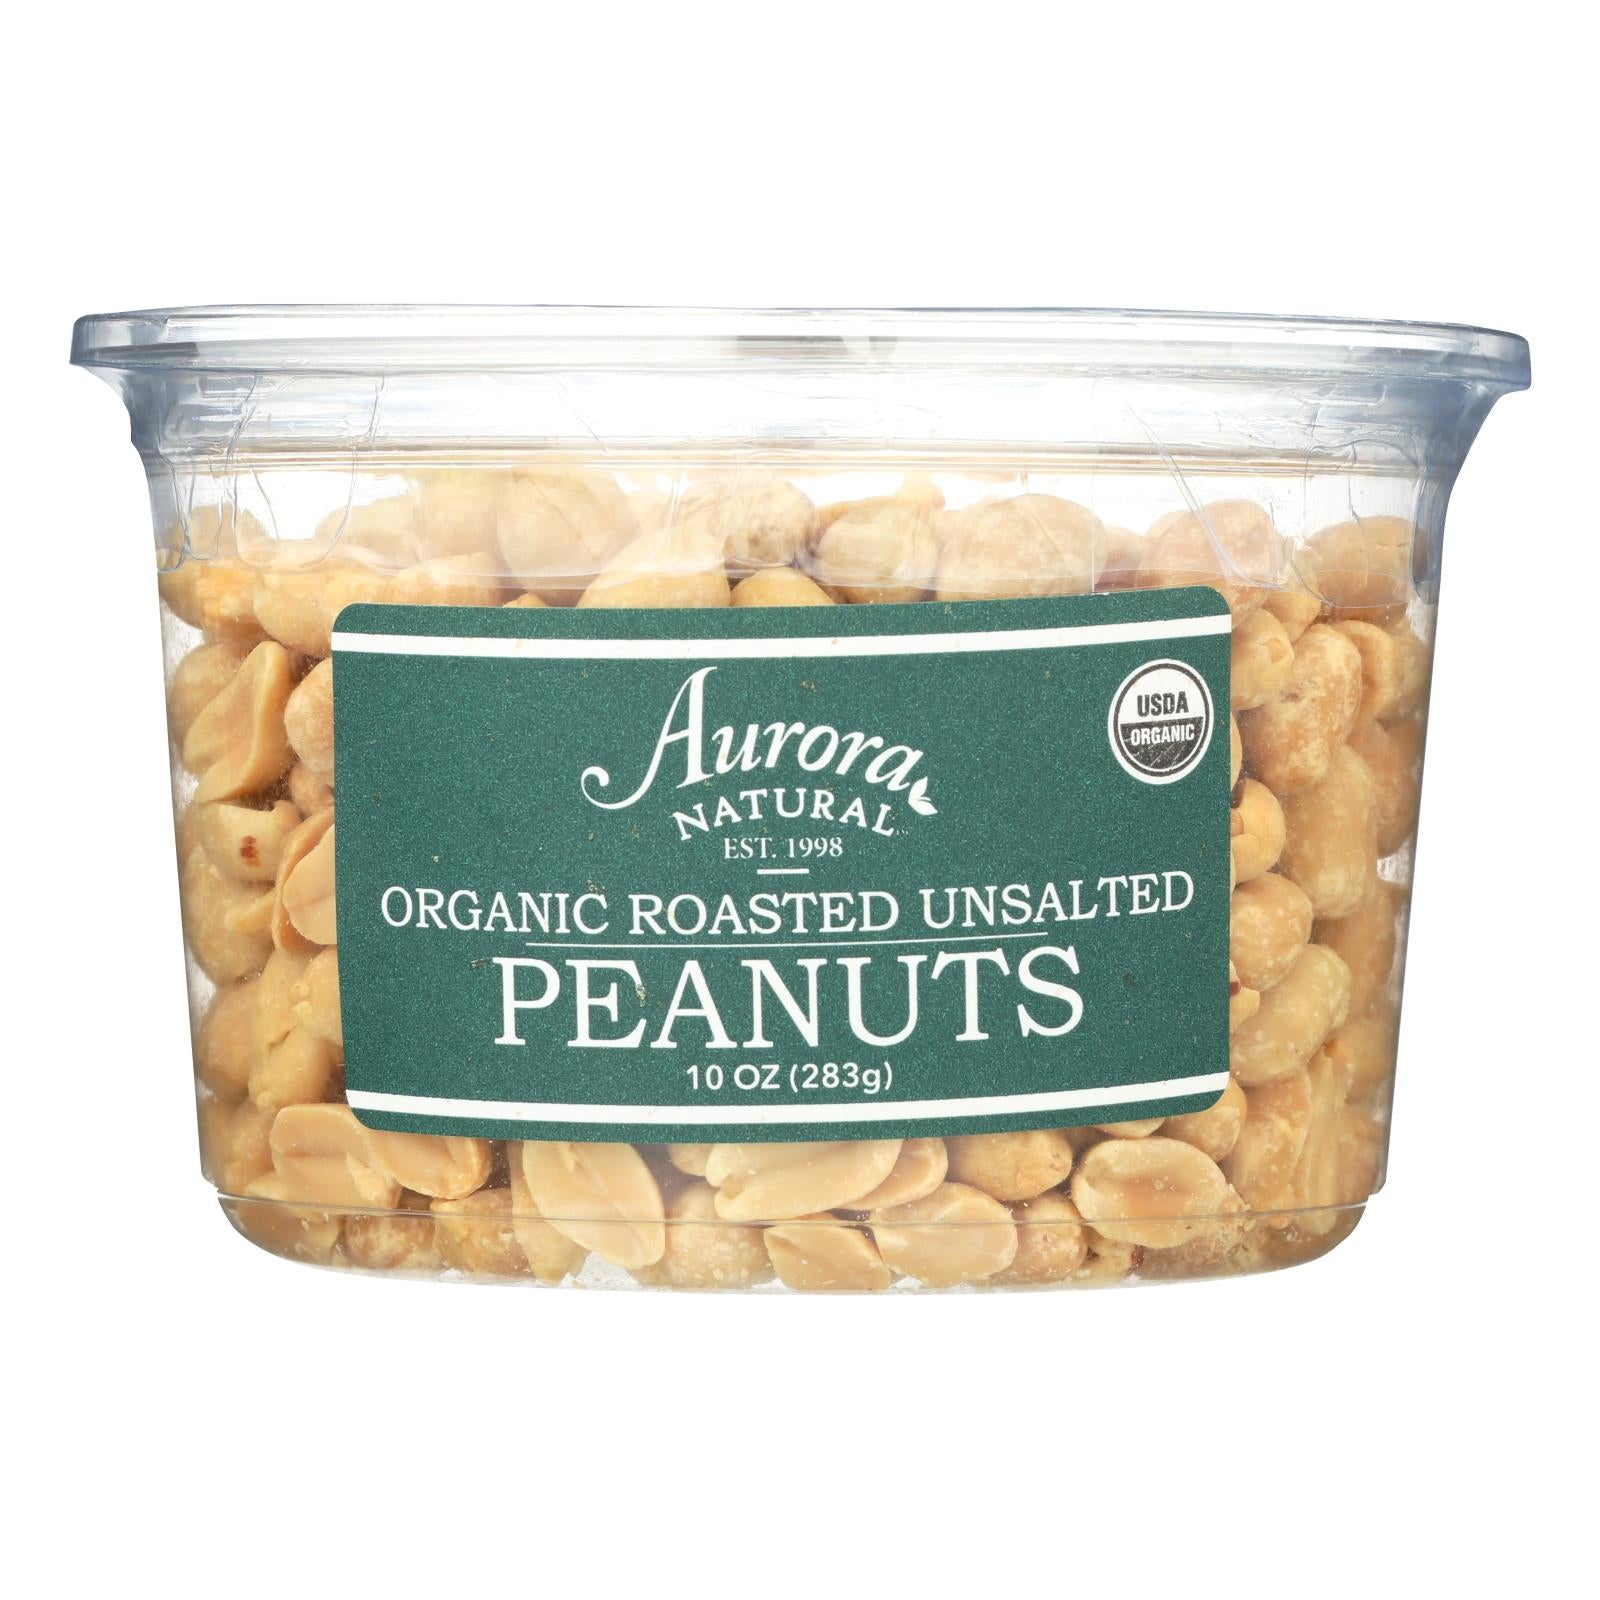 Aurora Natural Products, Aurora Natural Products - Organic Roasted Unsalted Peanuts - Case of 12 - 10 oz. (Pack of 12)